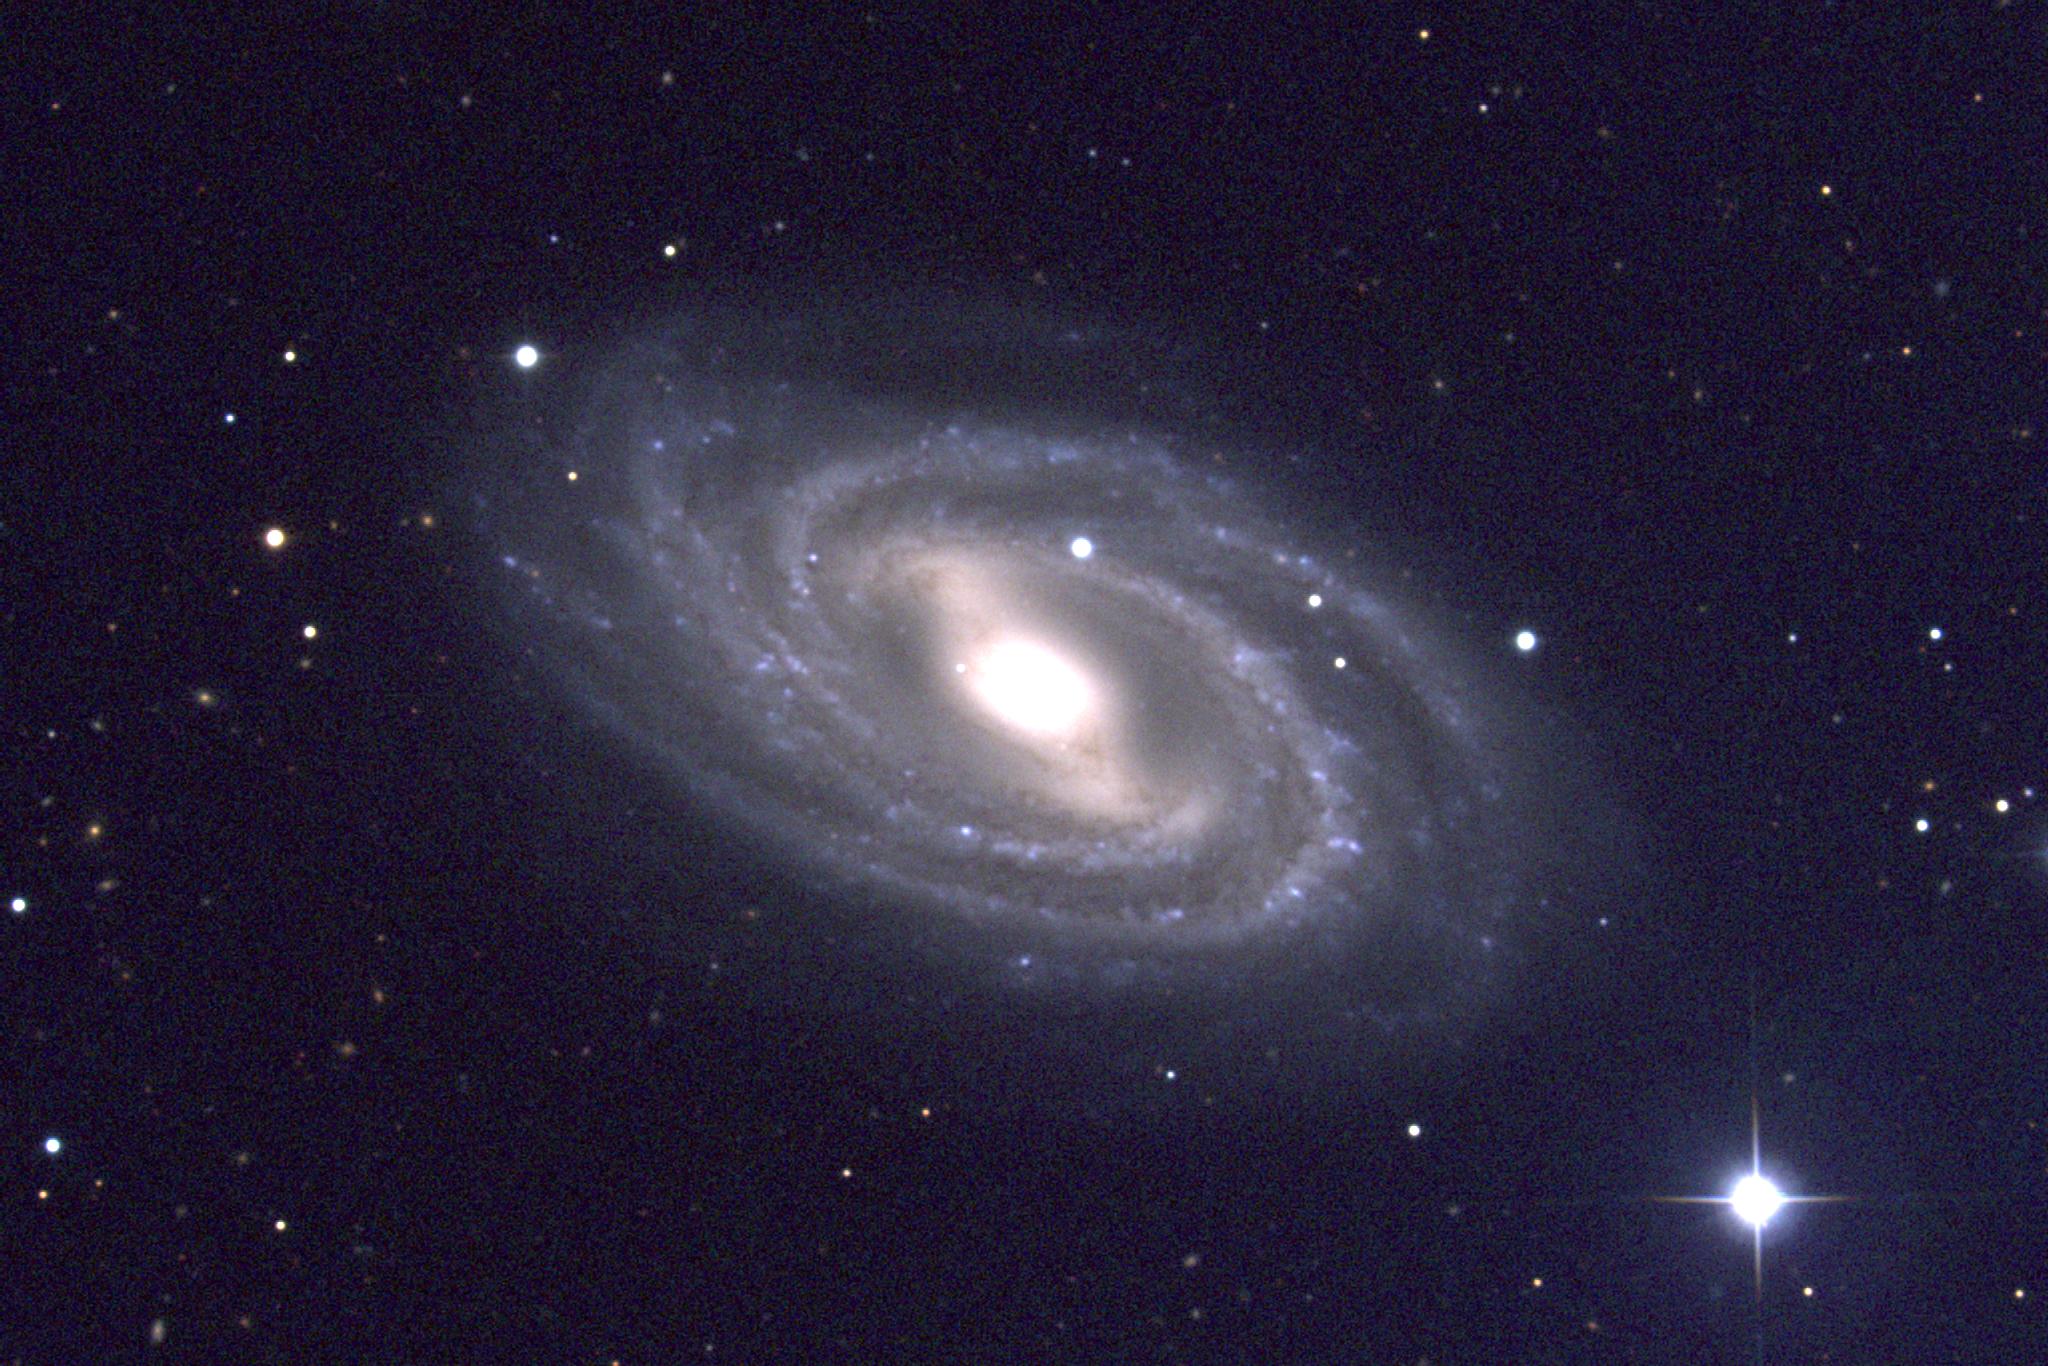 Une galaxie spirale barrée, M 109. Crédit : National Optical Astronomy Observatory/Association of Universities for Research in Astronomy/National Science Foundation